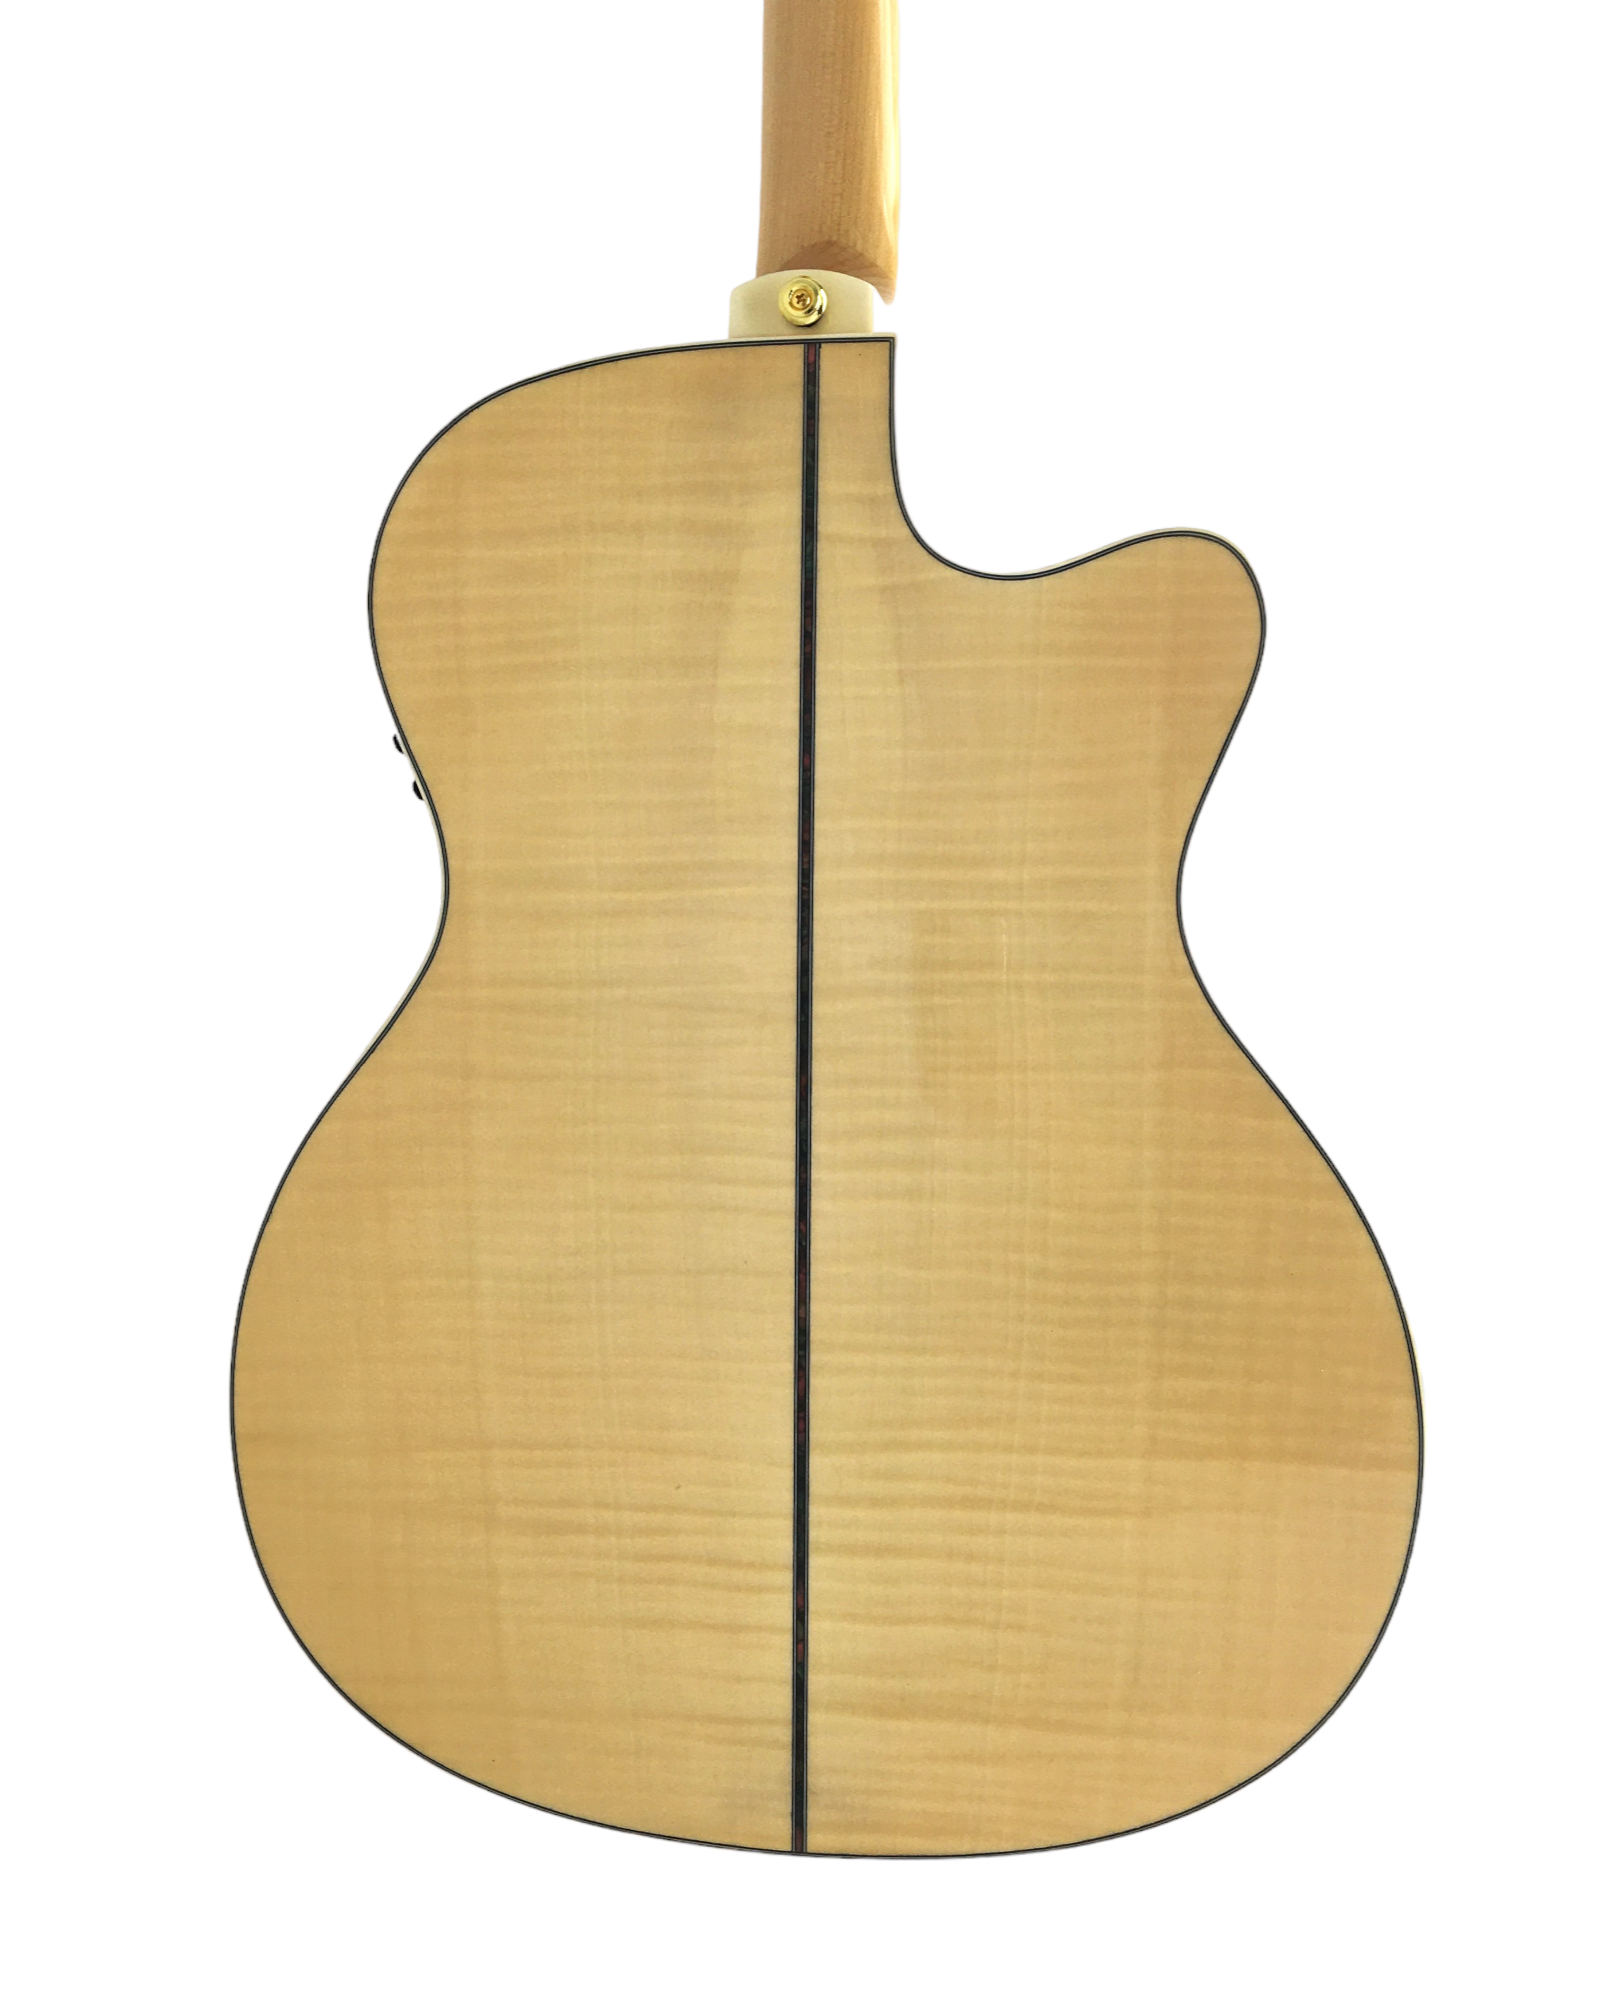 Caraya Left-Handed Thin-Body Built-In Pickups/Tuner Acoustic